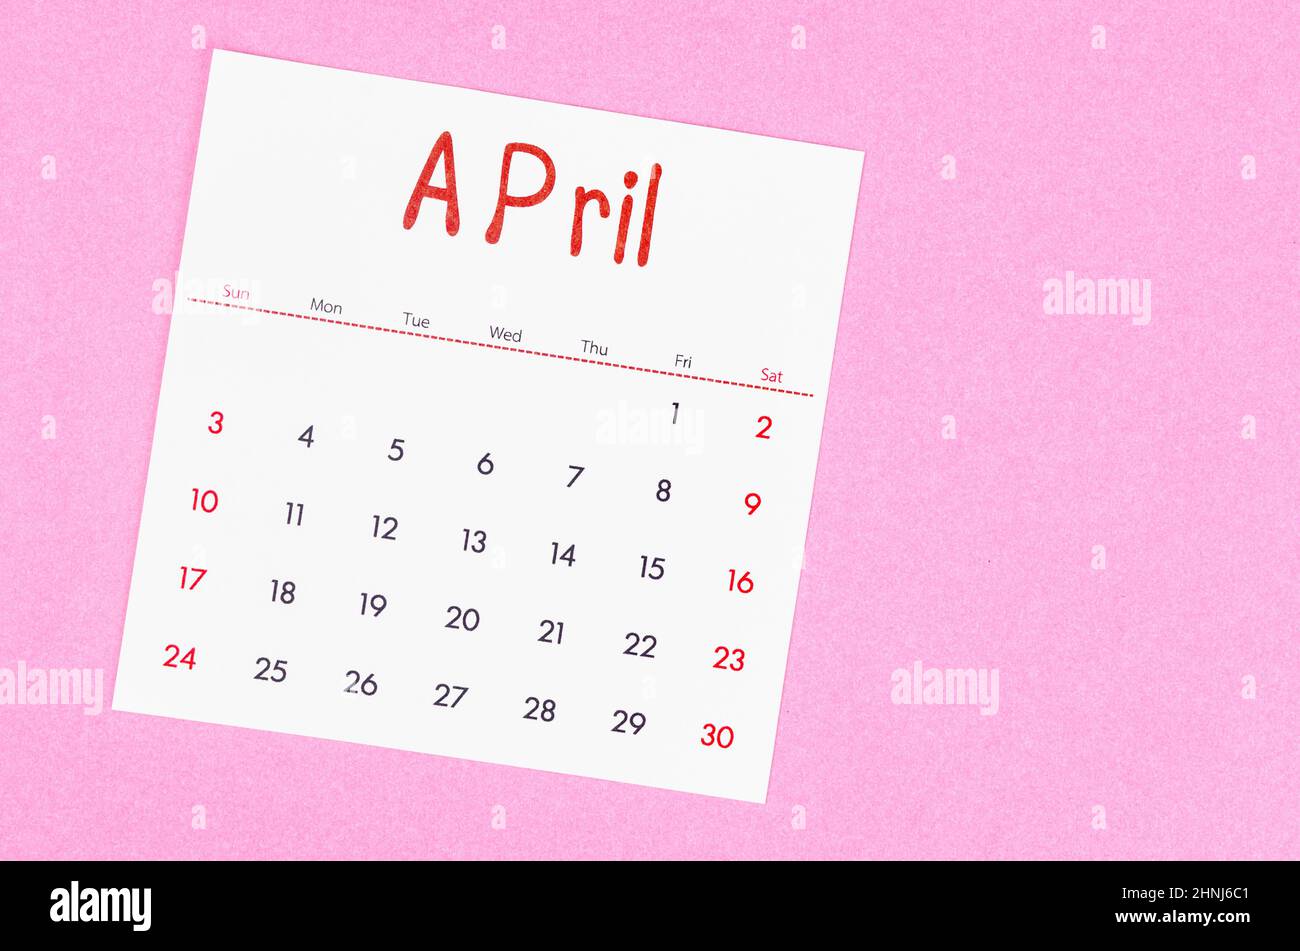 The April 2022 calendar on pink background with empty space. Stock Photo